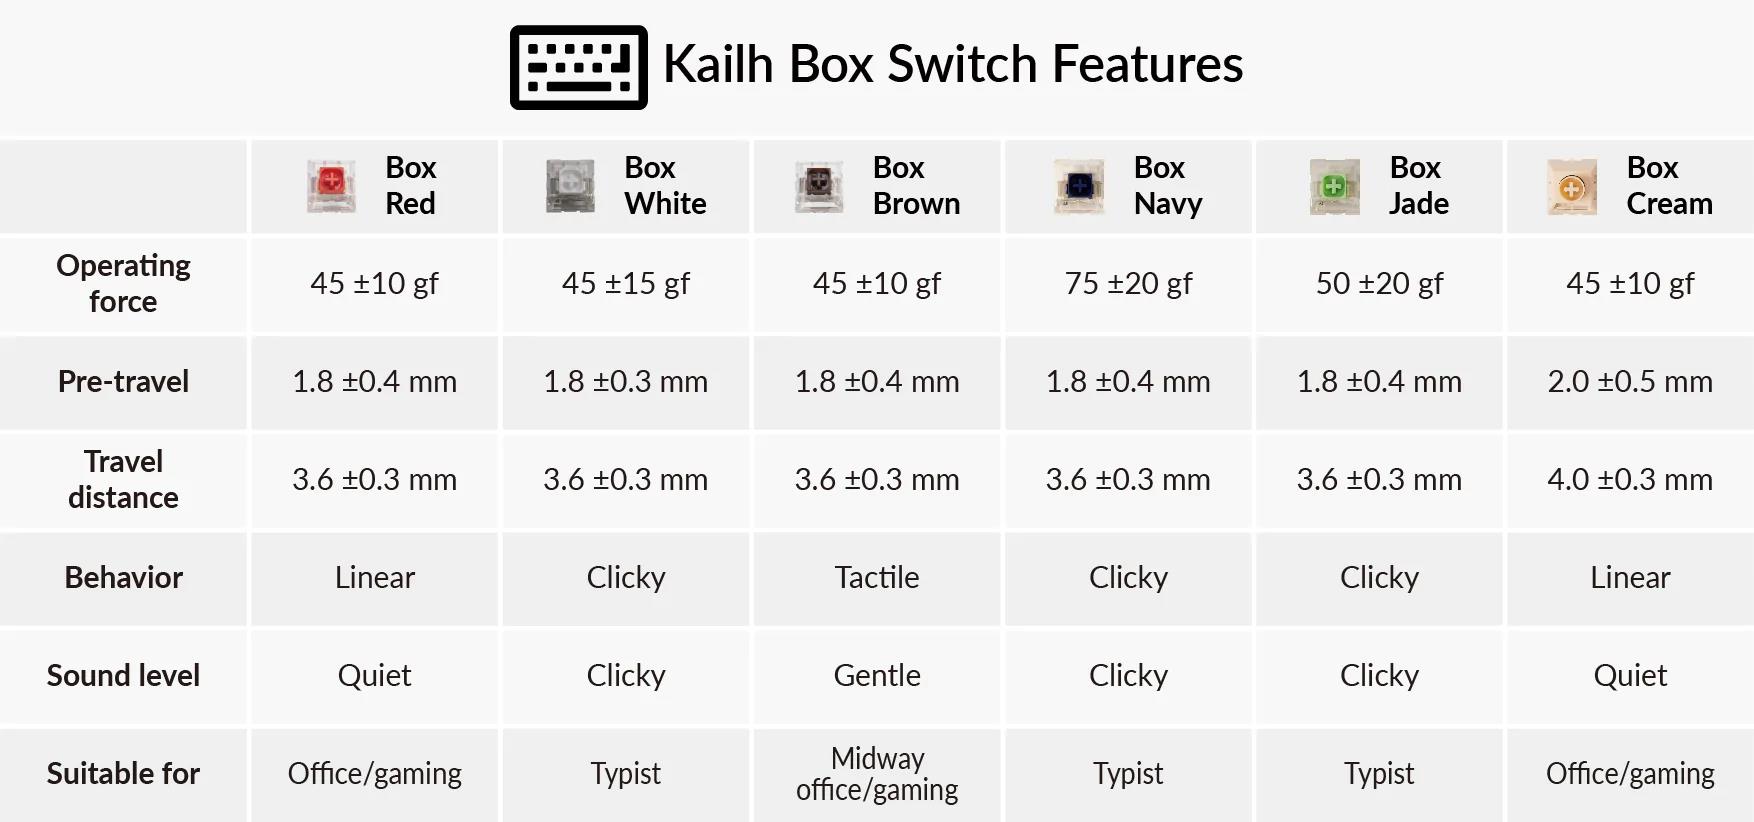 A large marketing image providing additional information about the product Keychron Kailh Box Cream Switch Set (45g Linear) 35pcs - Additional alt info not provided